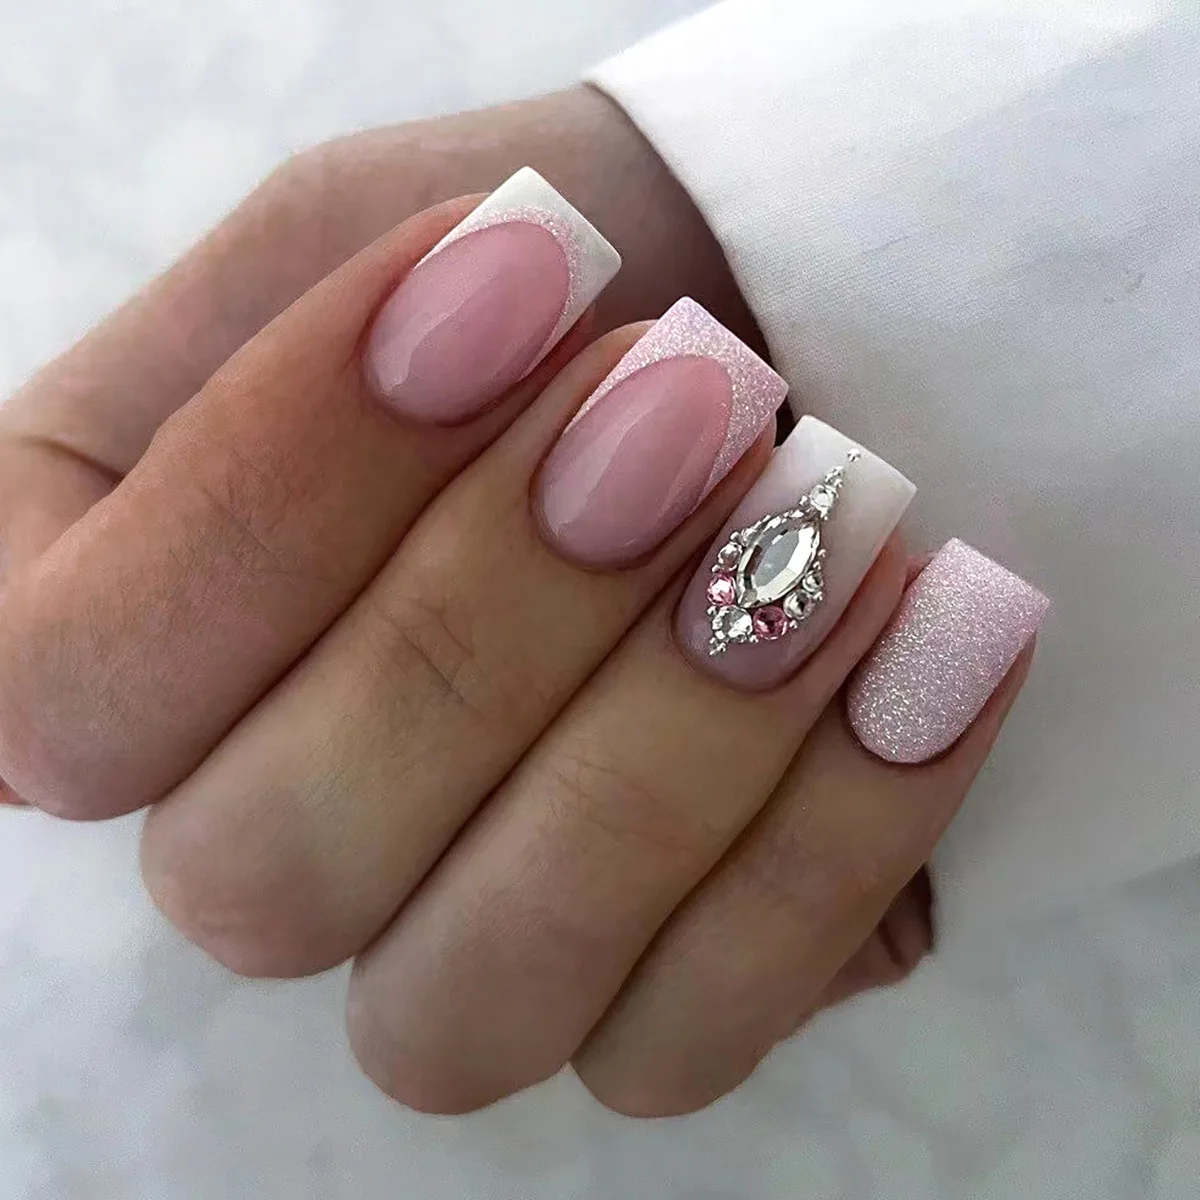 Short Nails? No Problem! Our Favorite Short Nail Styles To Try - Booksy.com